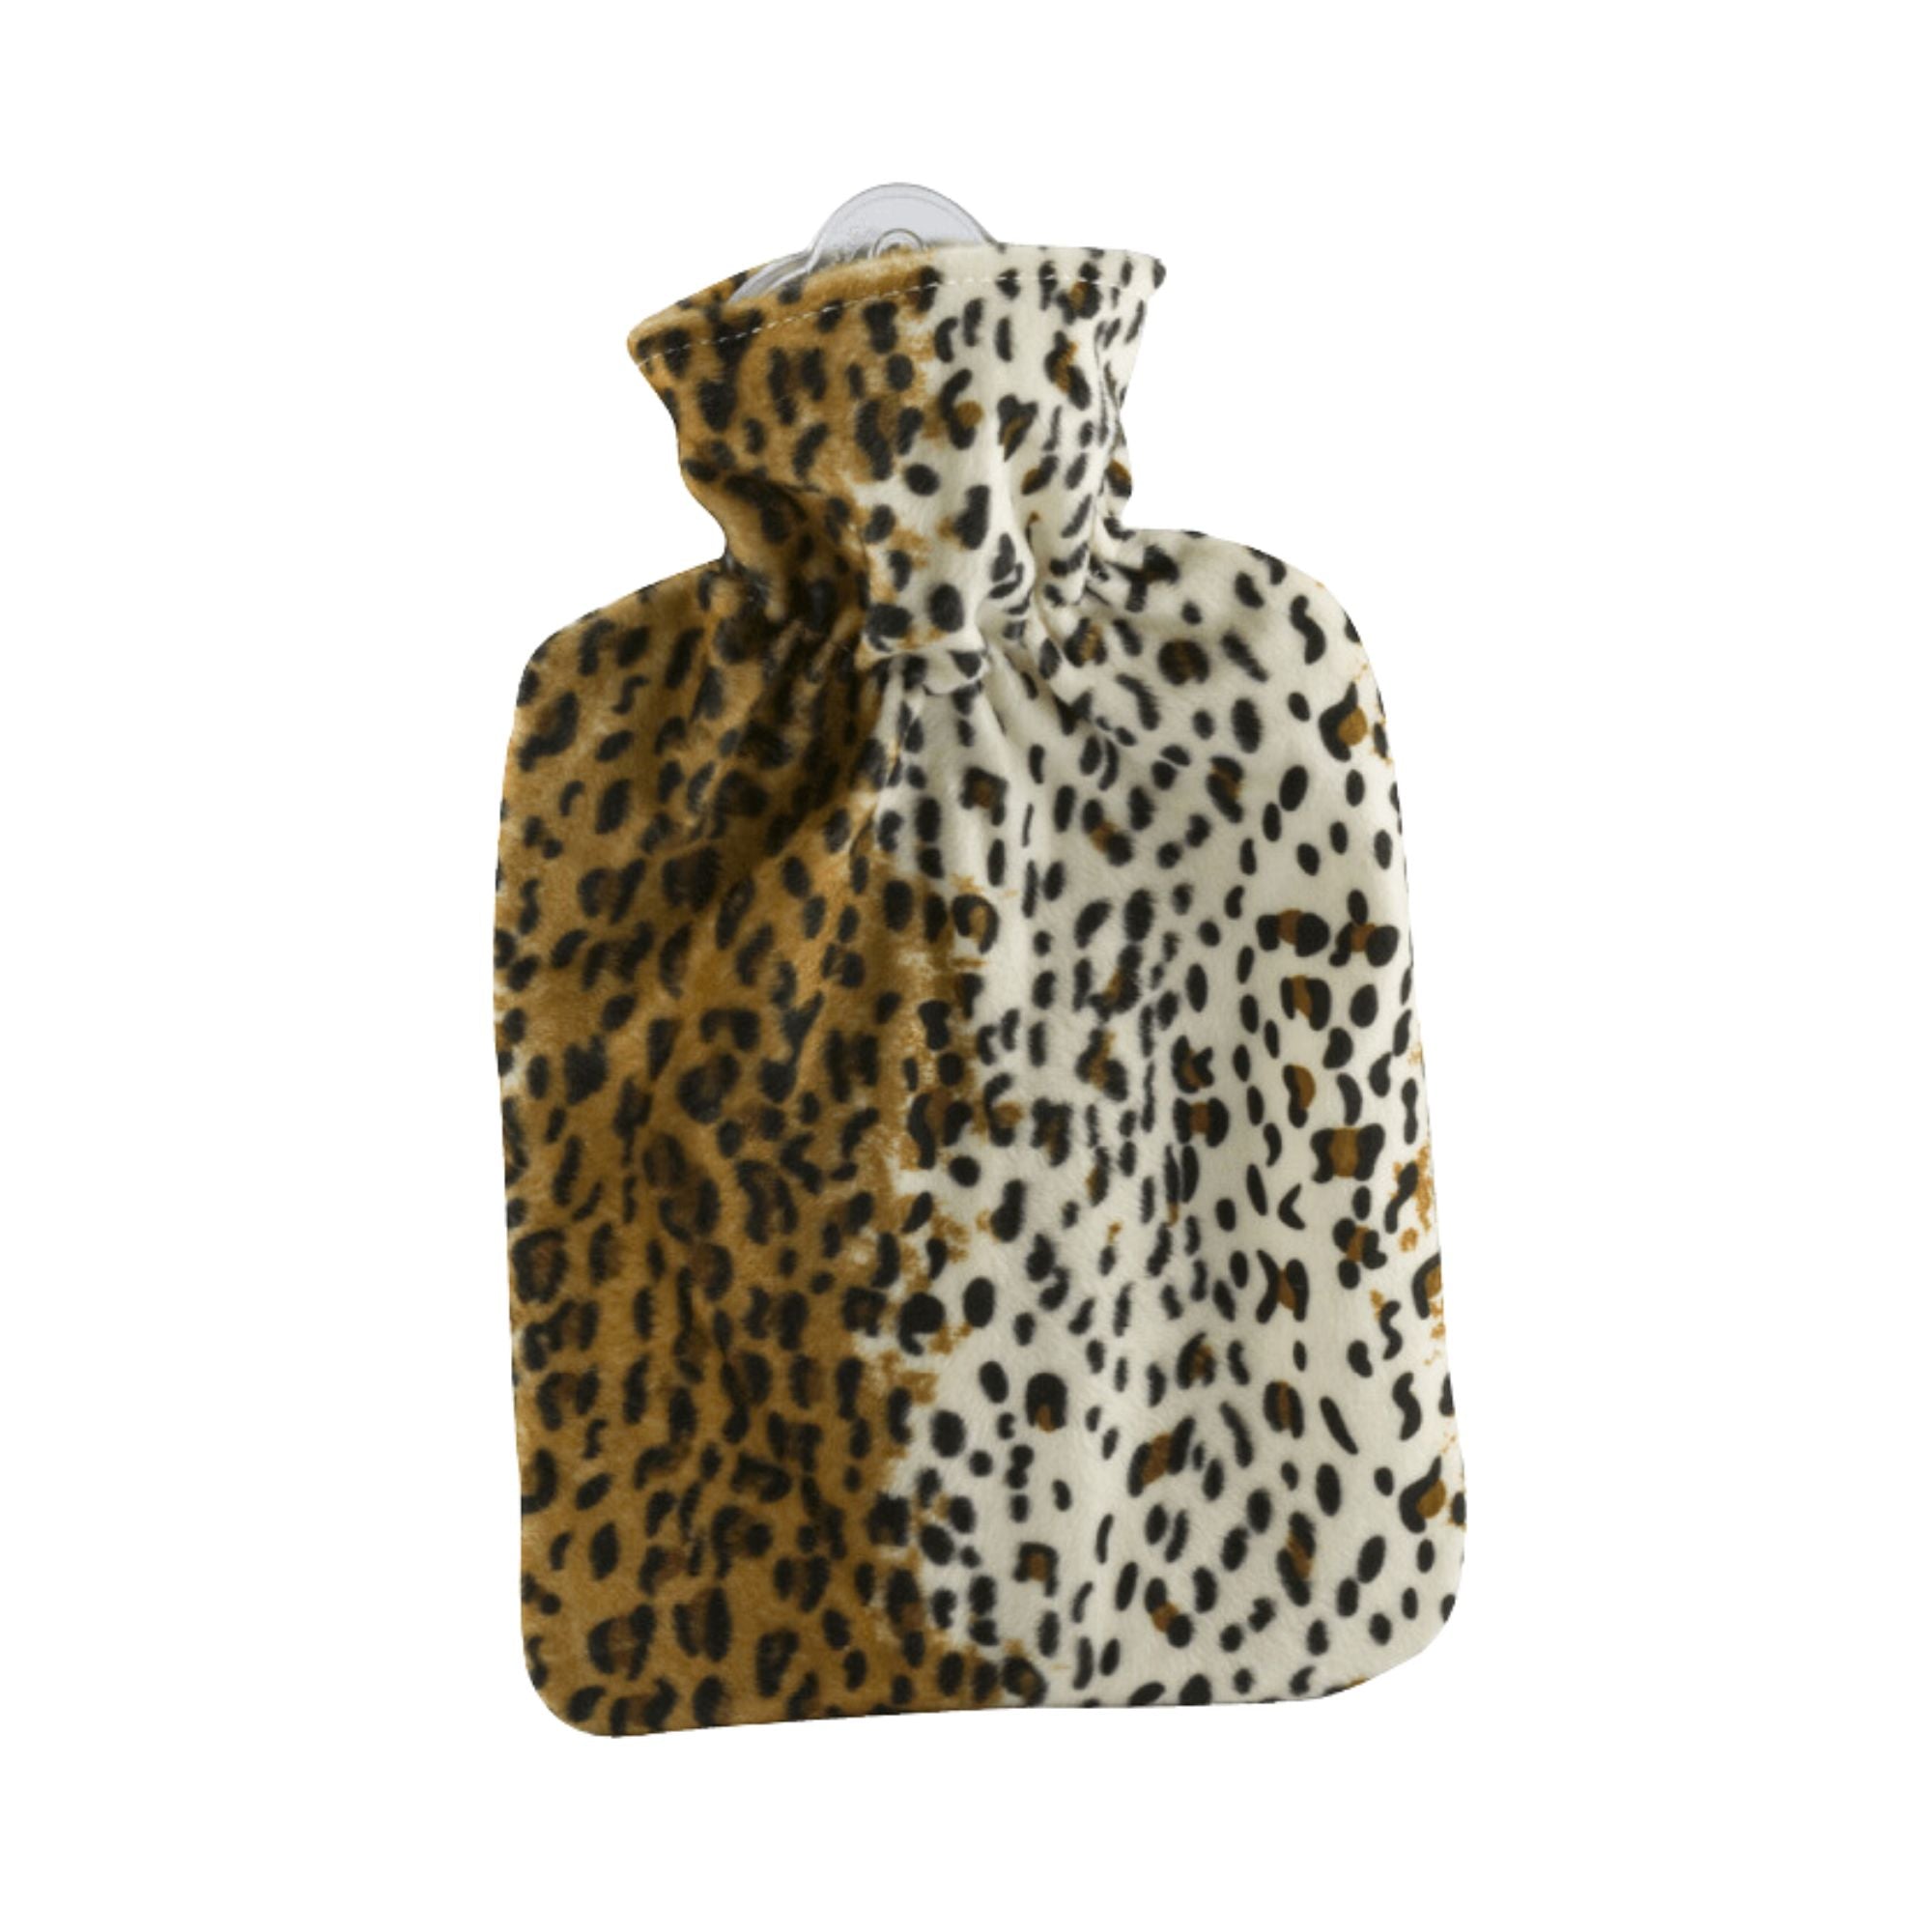 1.8 Litre Classic Hot Water Bottle with Leopard Pattern Cover (rubberless)